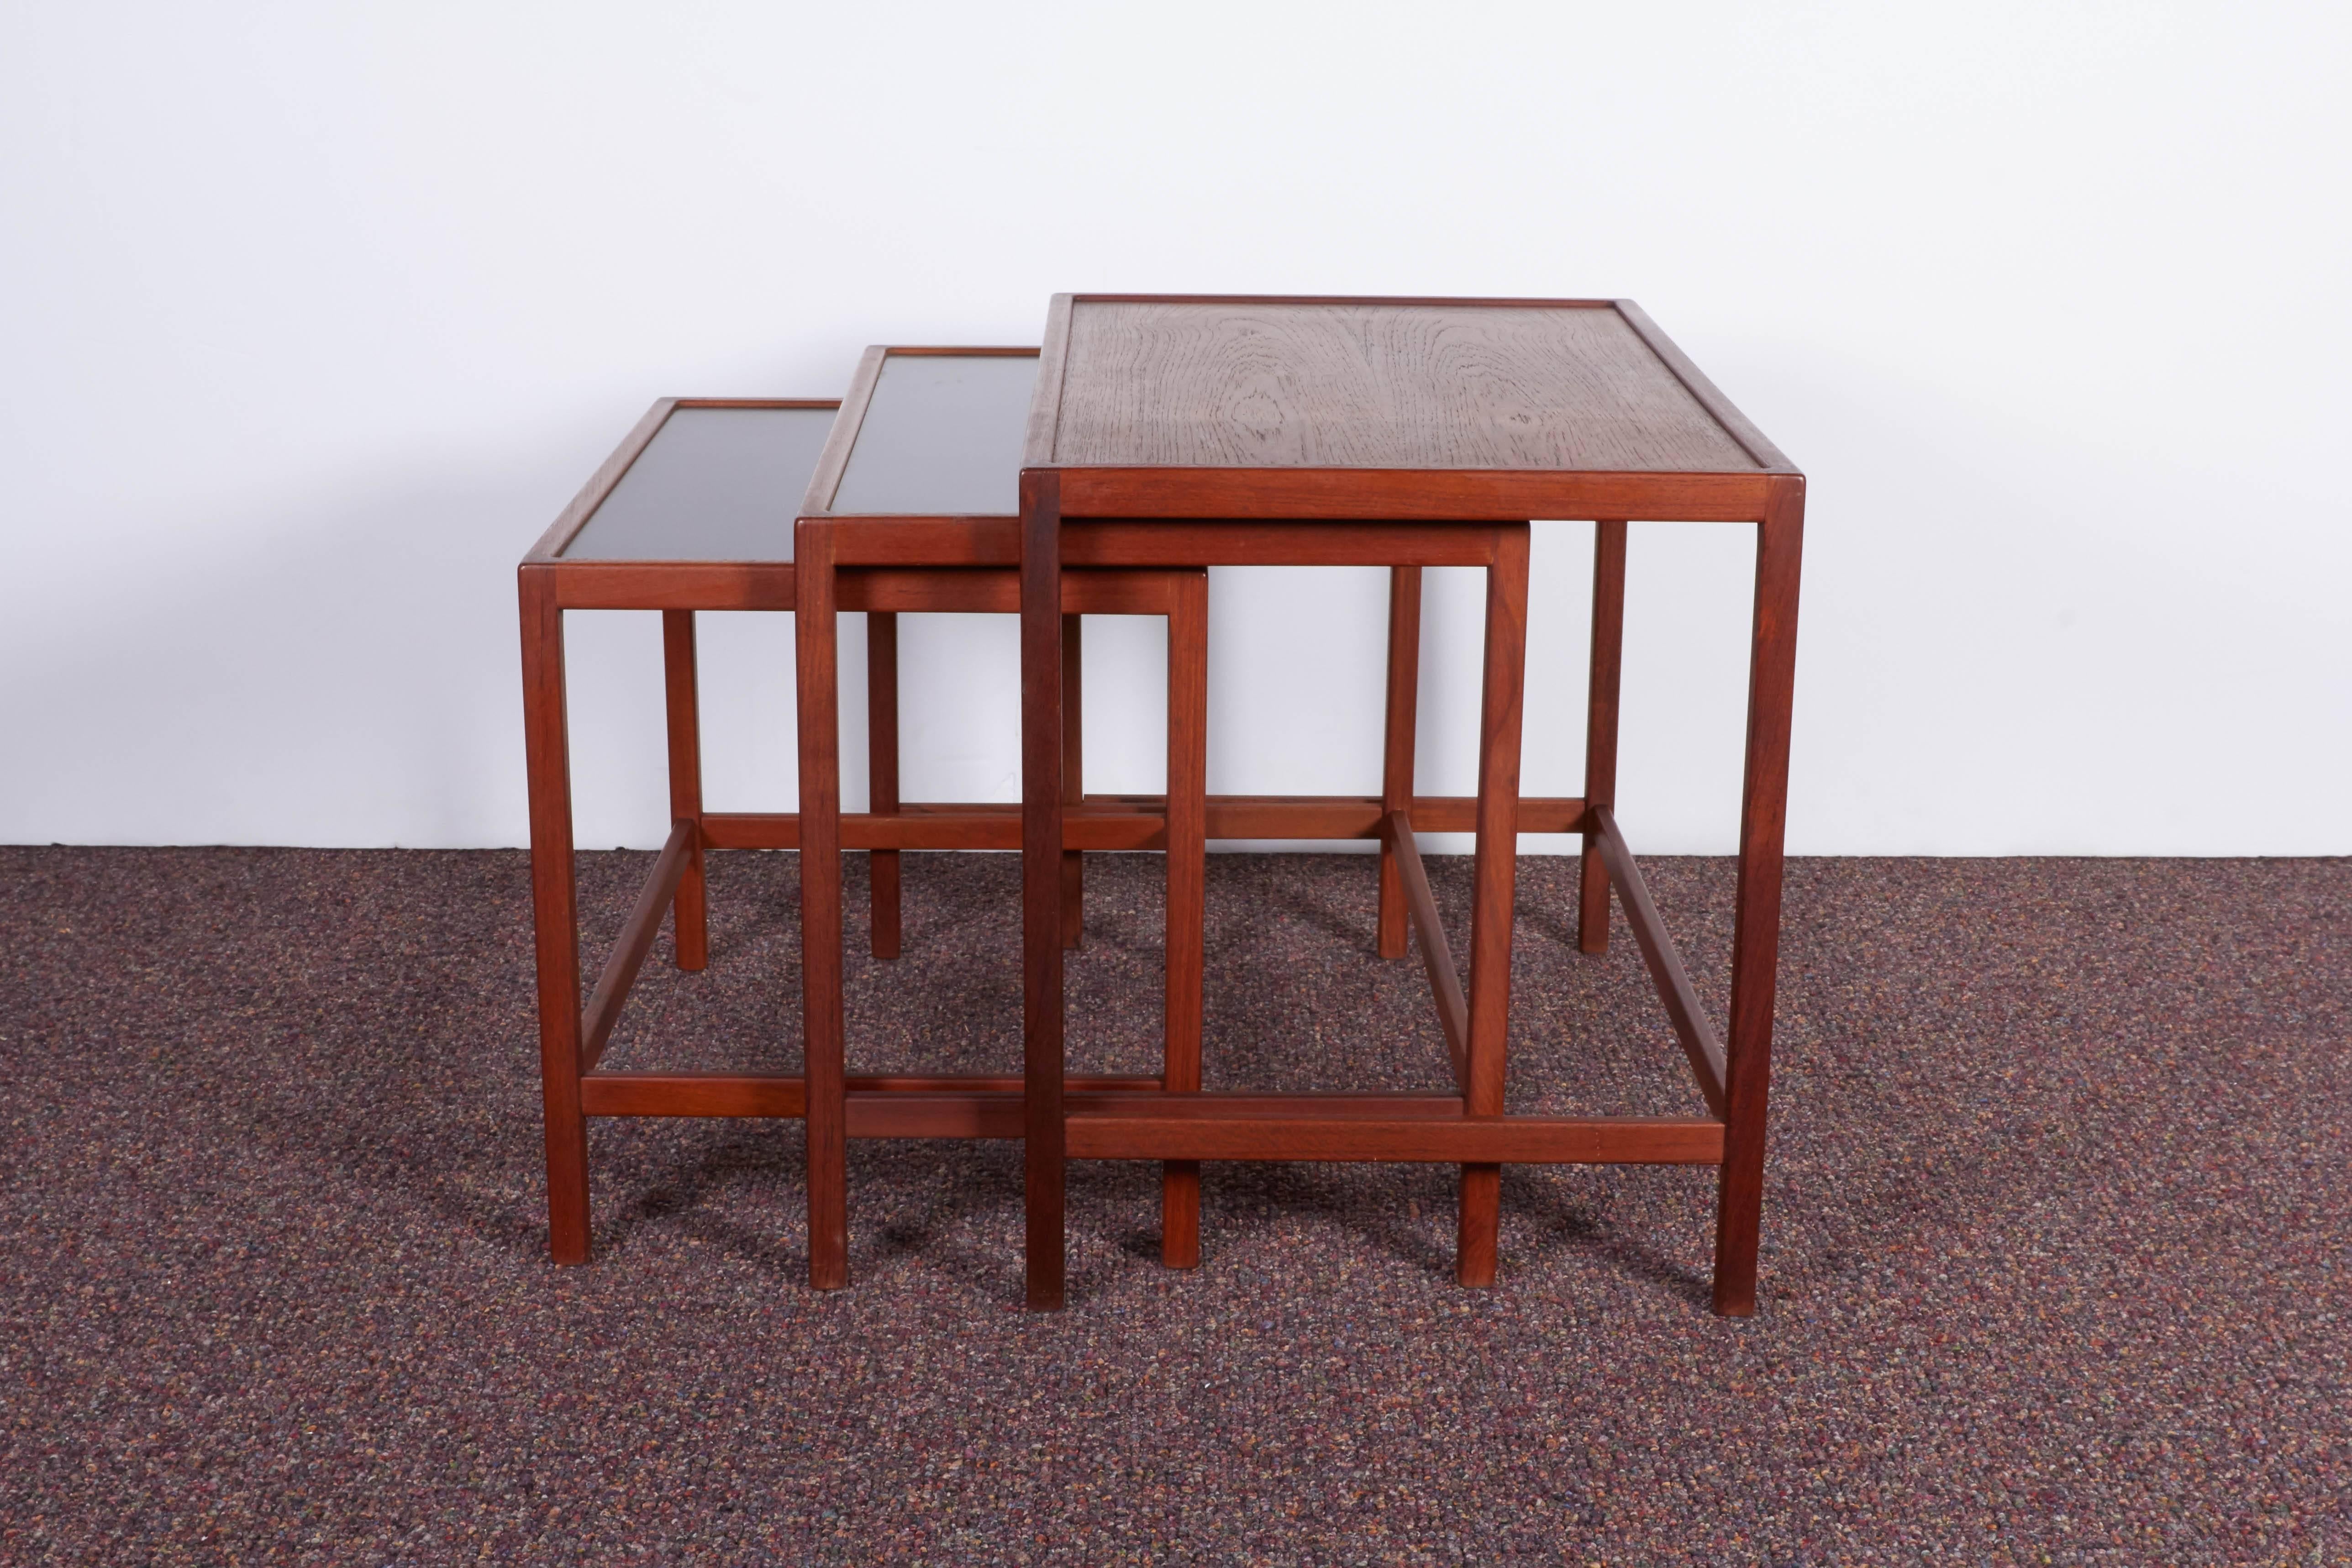 A set of three highly linear nesting tables in teakwood by designer Kurt Ostervig, manufactured in Denmark, circa 1960s, the smaller two with inset black laminate tops. All three tables remain in very good vintage condition.

Dimensions in